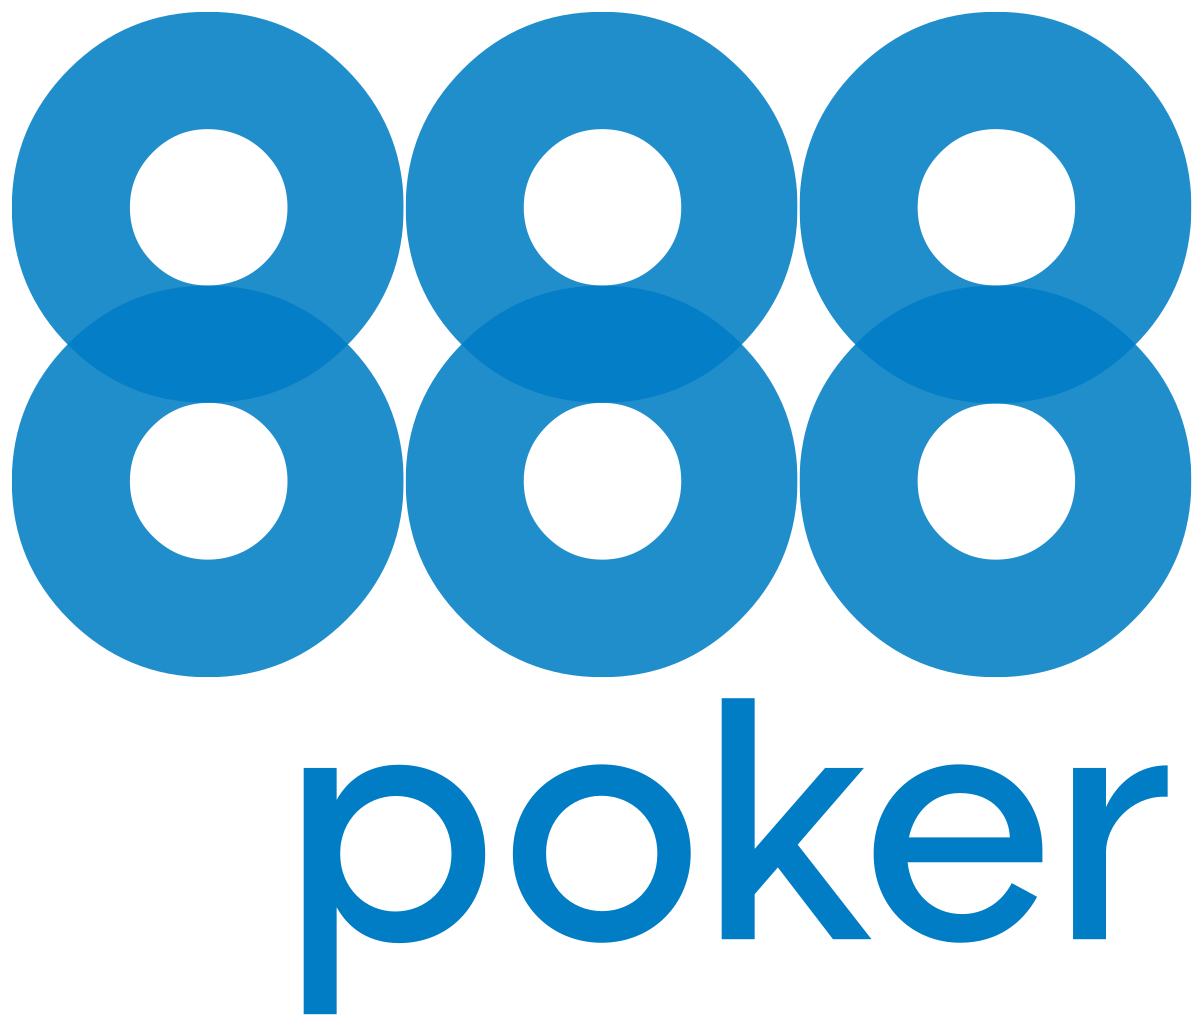 888 Poker coupons and bonus codes for new customers